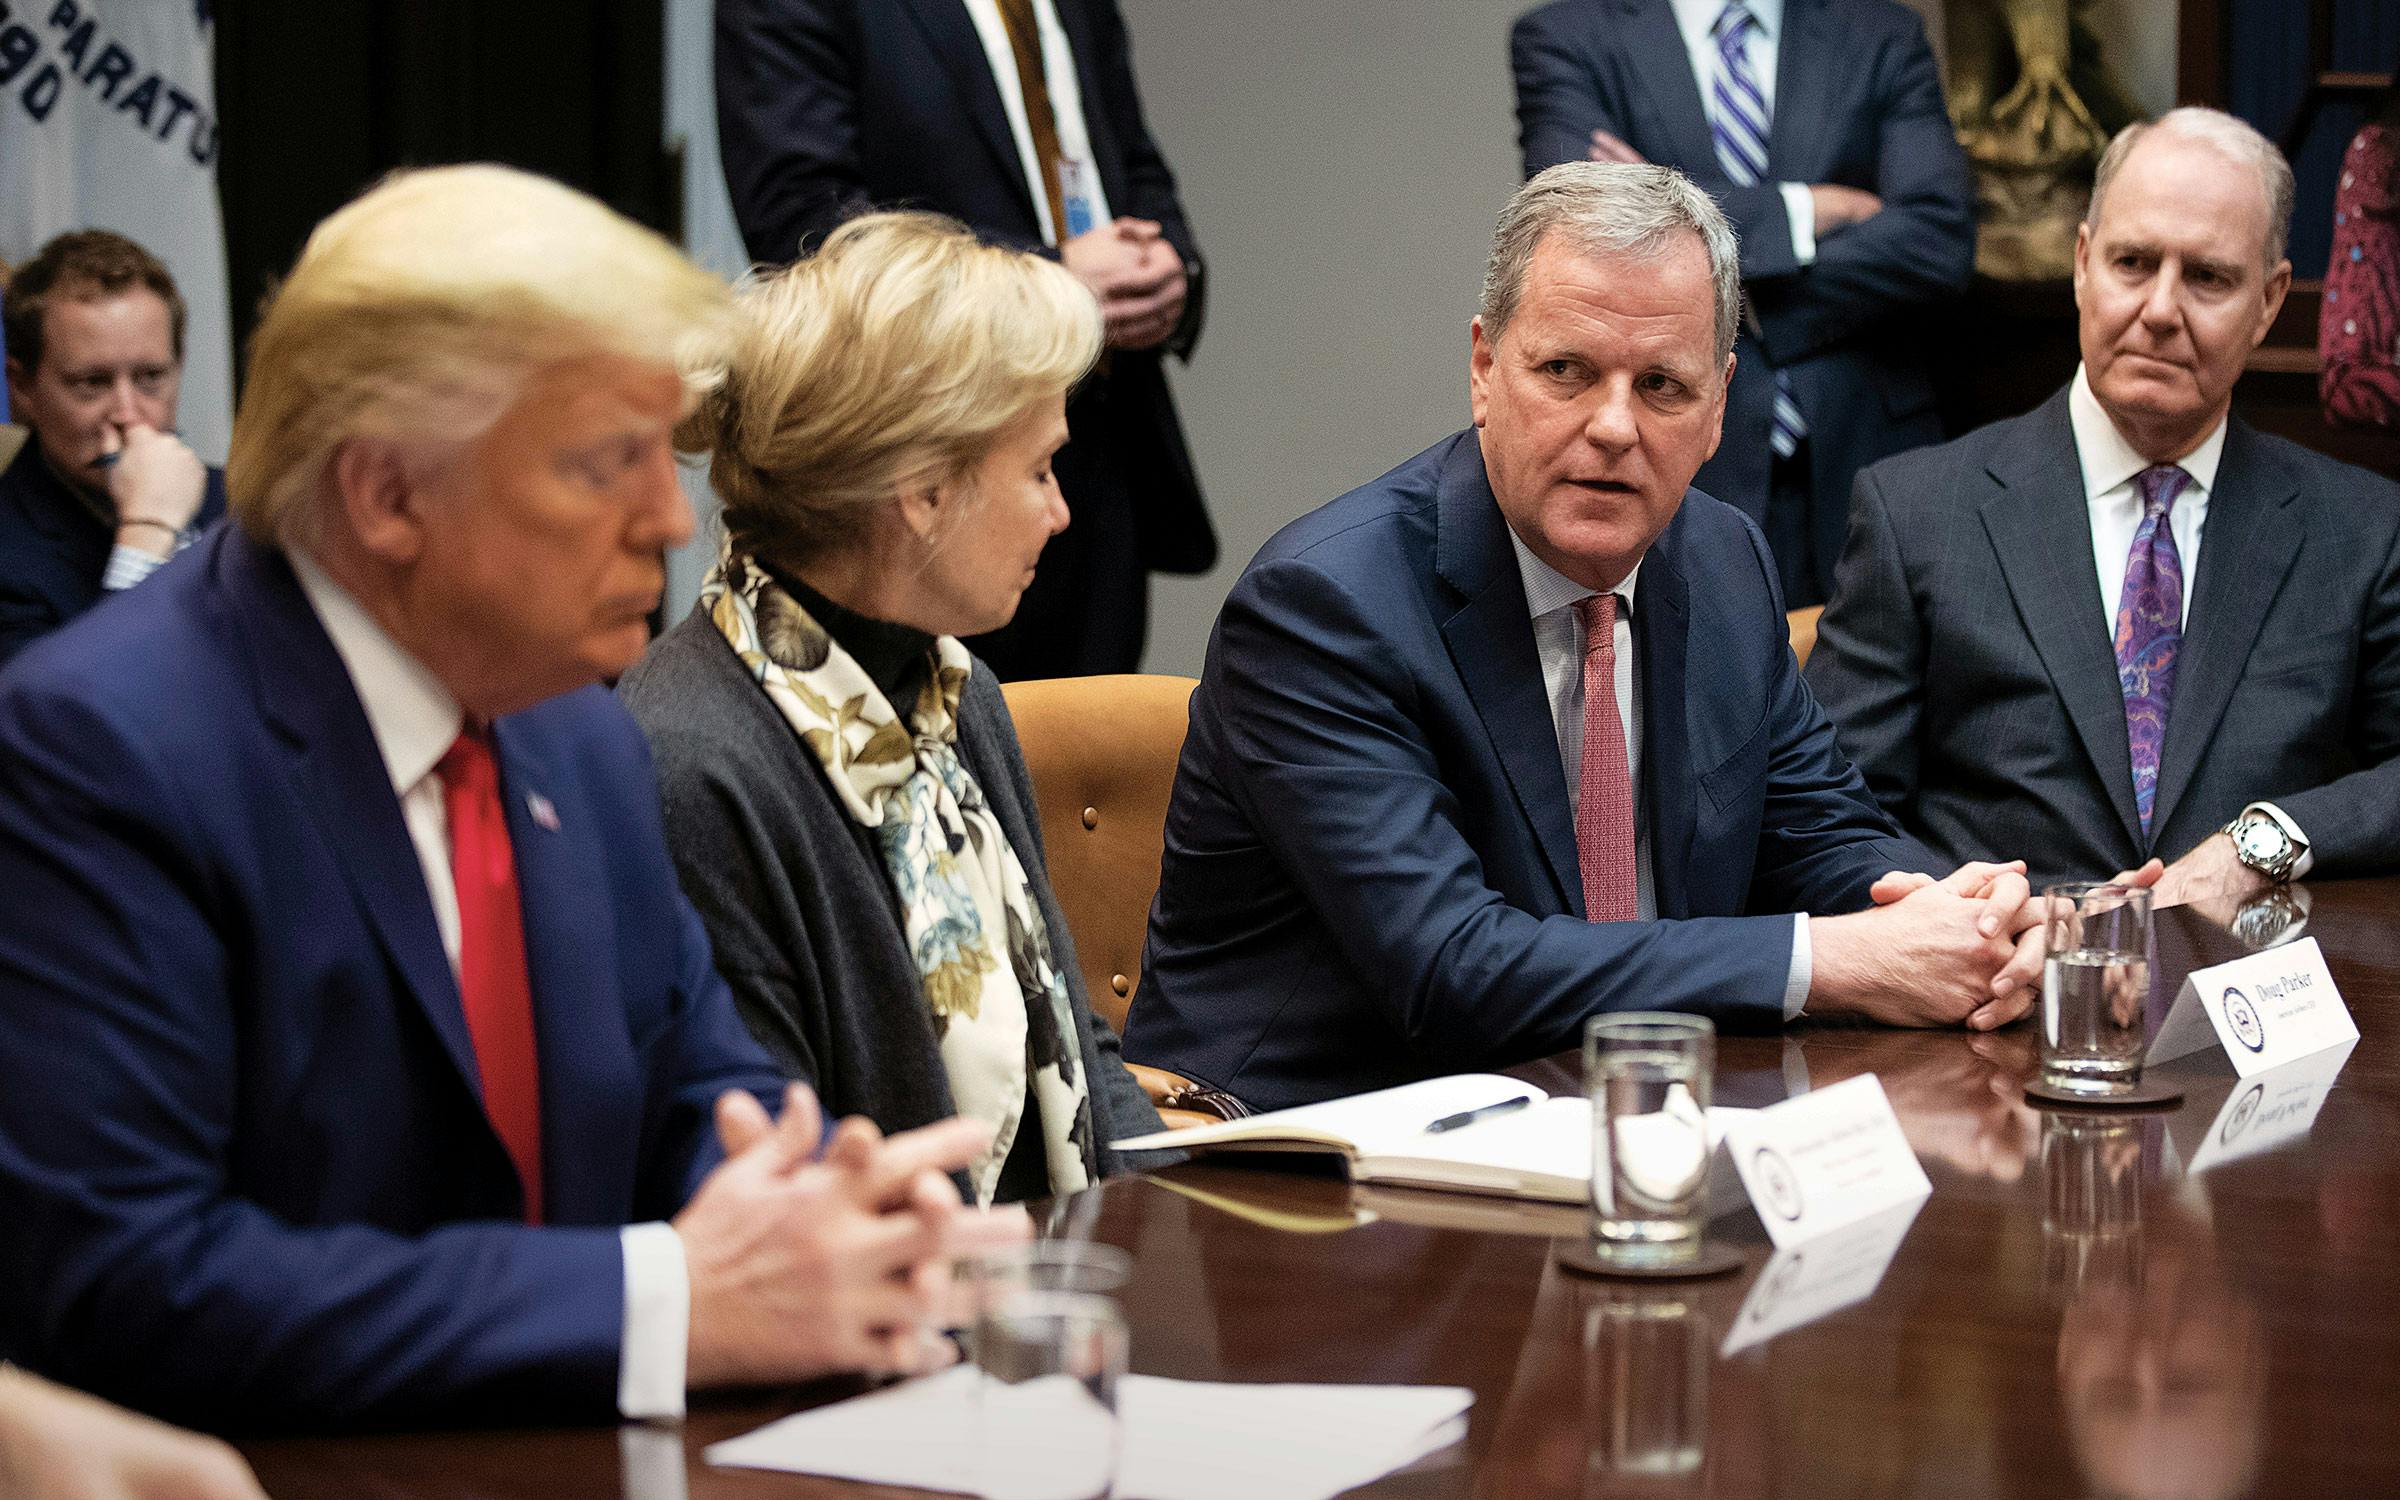 American CEO Doug Parker, second from right, with Southwest CEO Gary Kelly, right, at the White House on March 4, 2020.